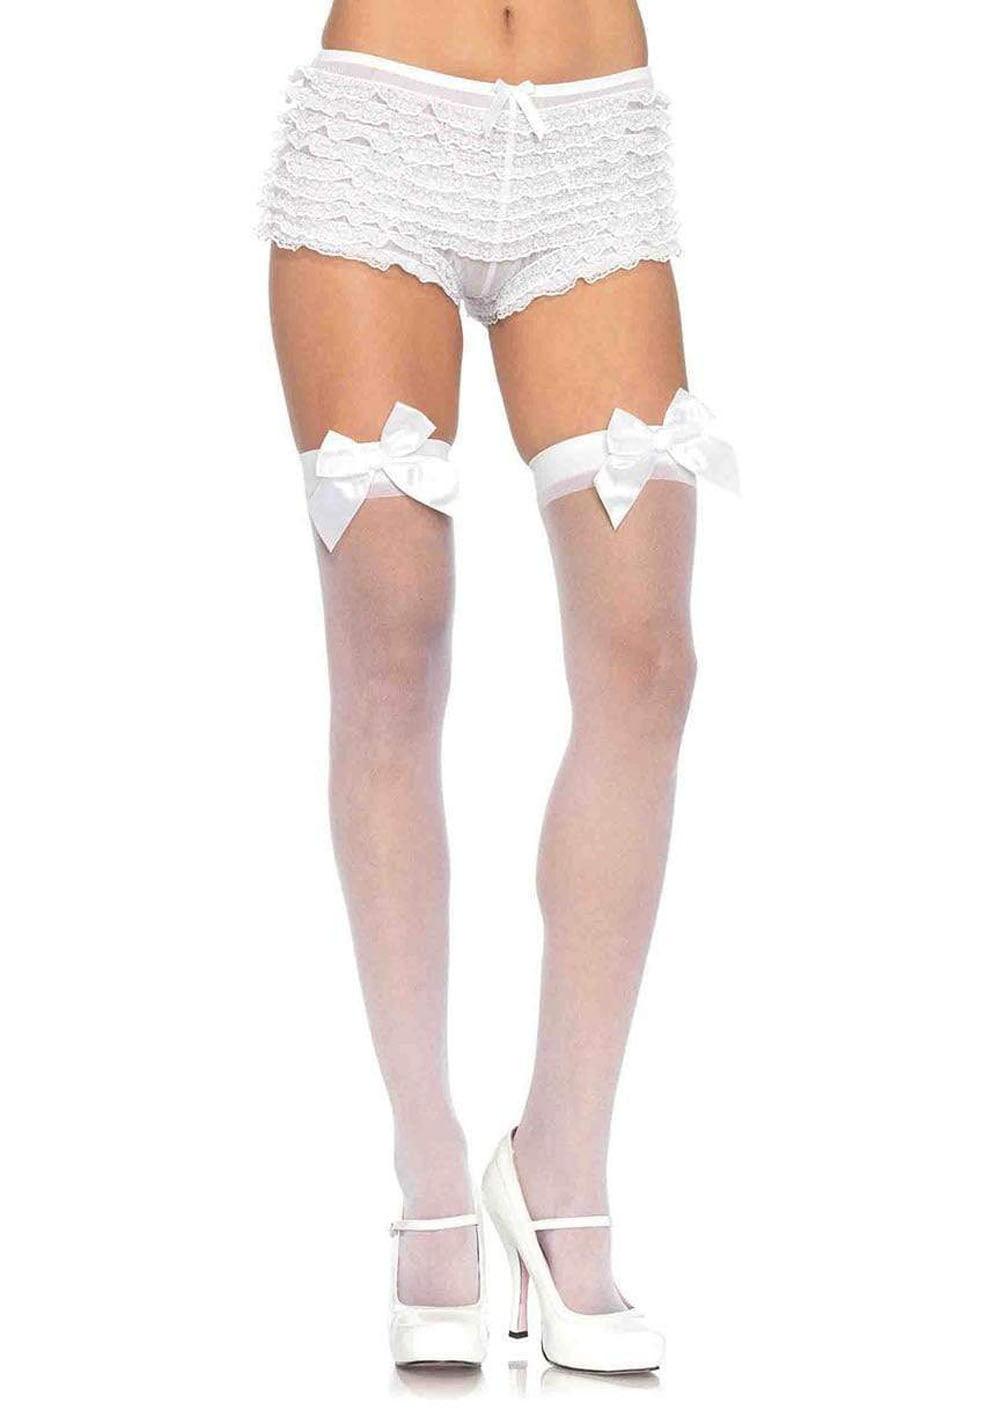 Sheer Thigh Highs - One Size - White - My Sex Toy Hub